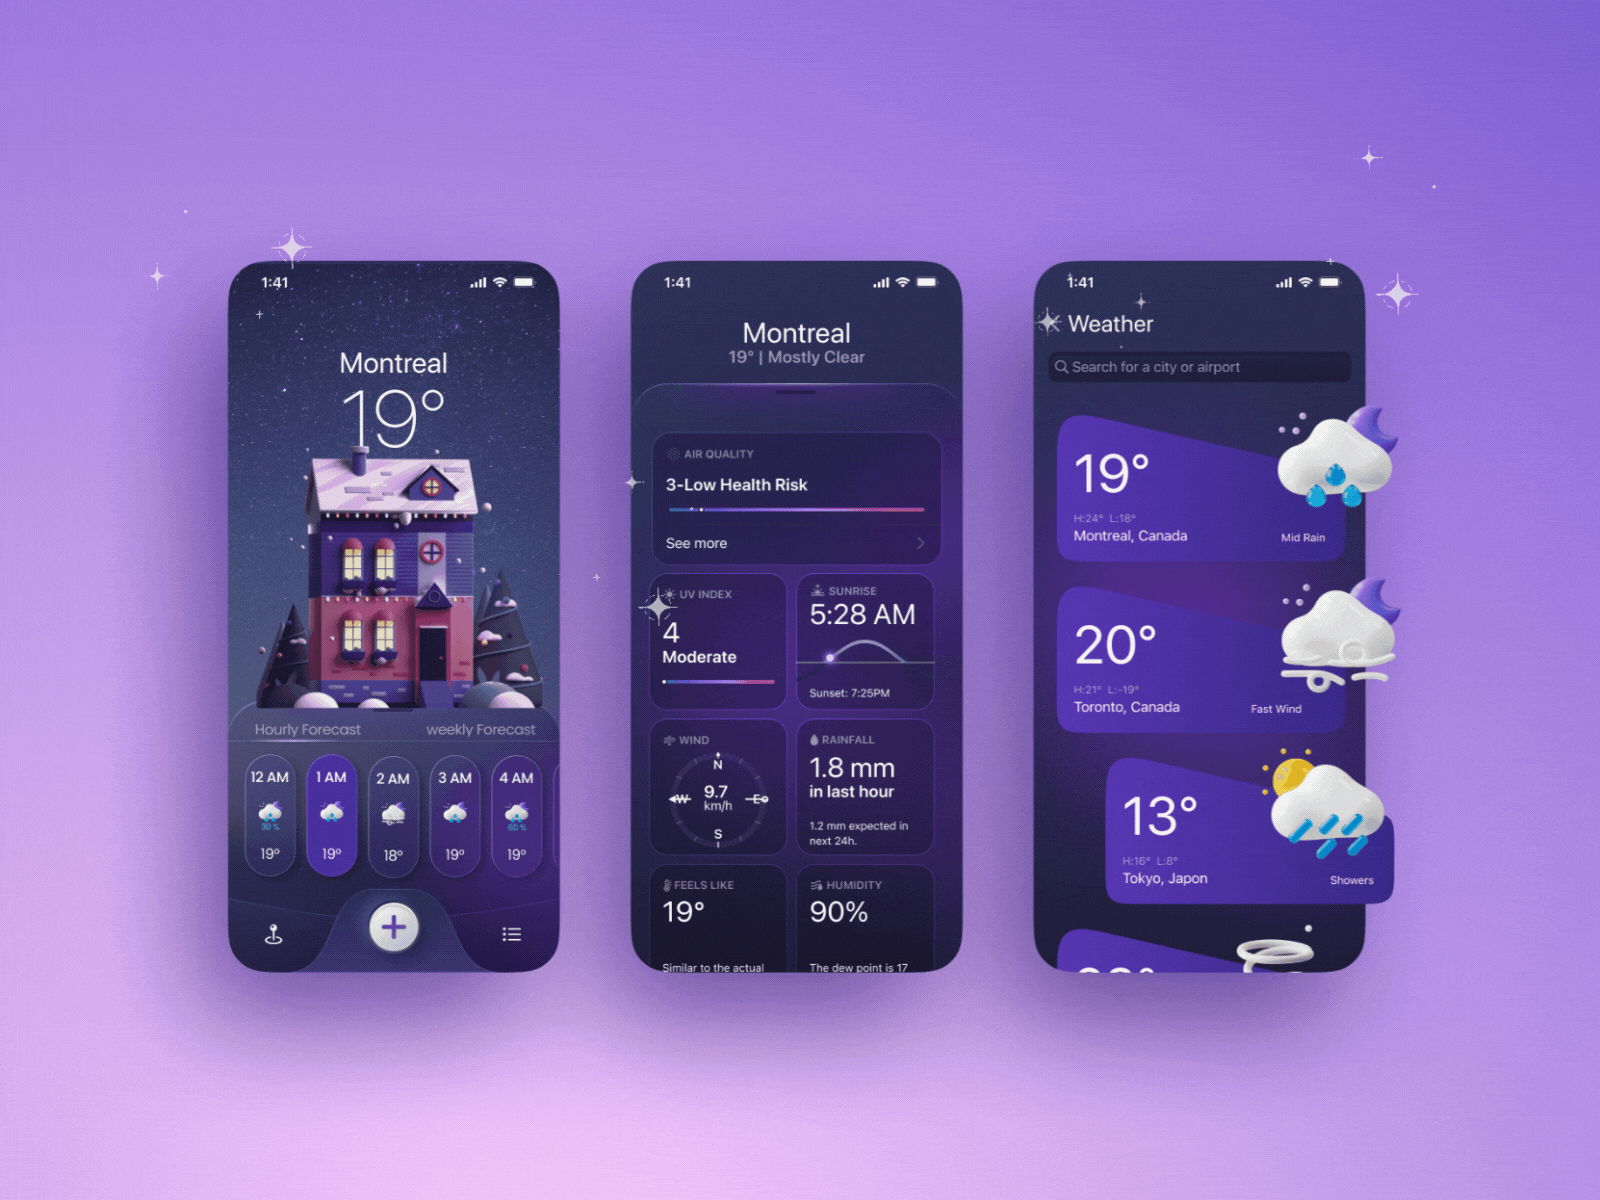 Simplicity at its Best: Modern Minimalist Weather App UI accurateweather cleanlook currentconditions customizable easytoread essentialweatherinfo forecast functionality innovative minimalism minimalistdesign modernui simplicity sleekdesign trendy up to date userfriendly userinterface weatherapp welcoming